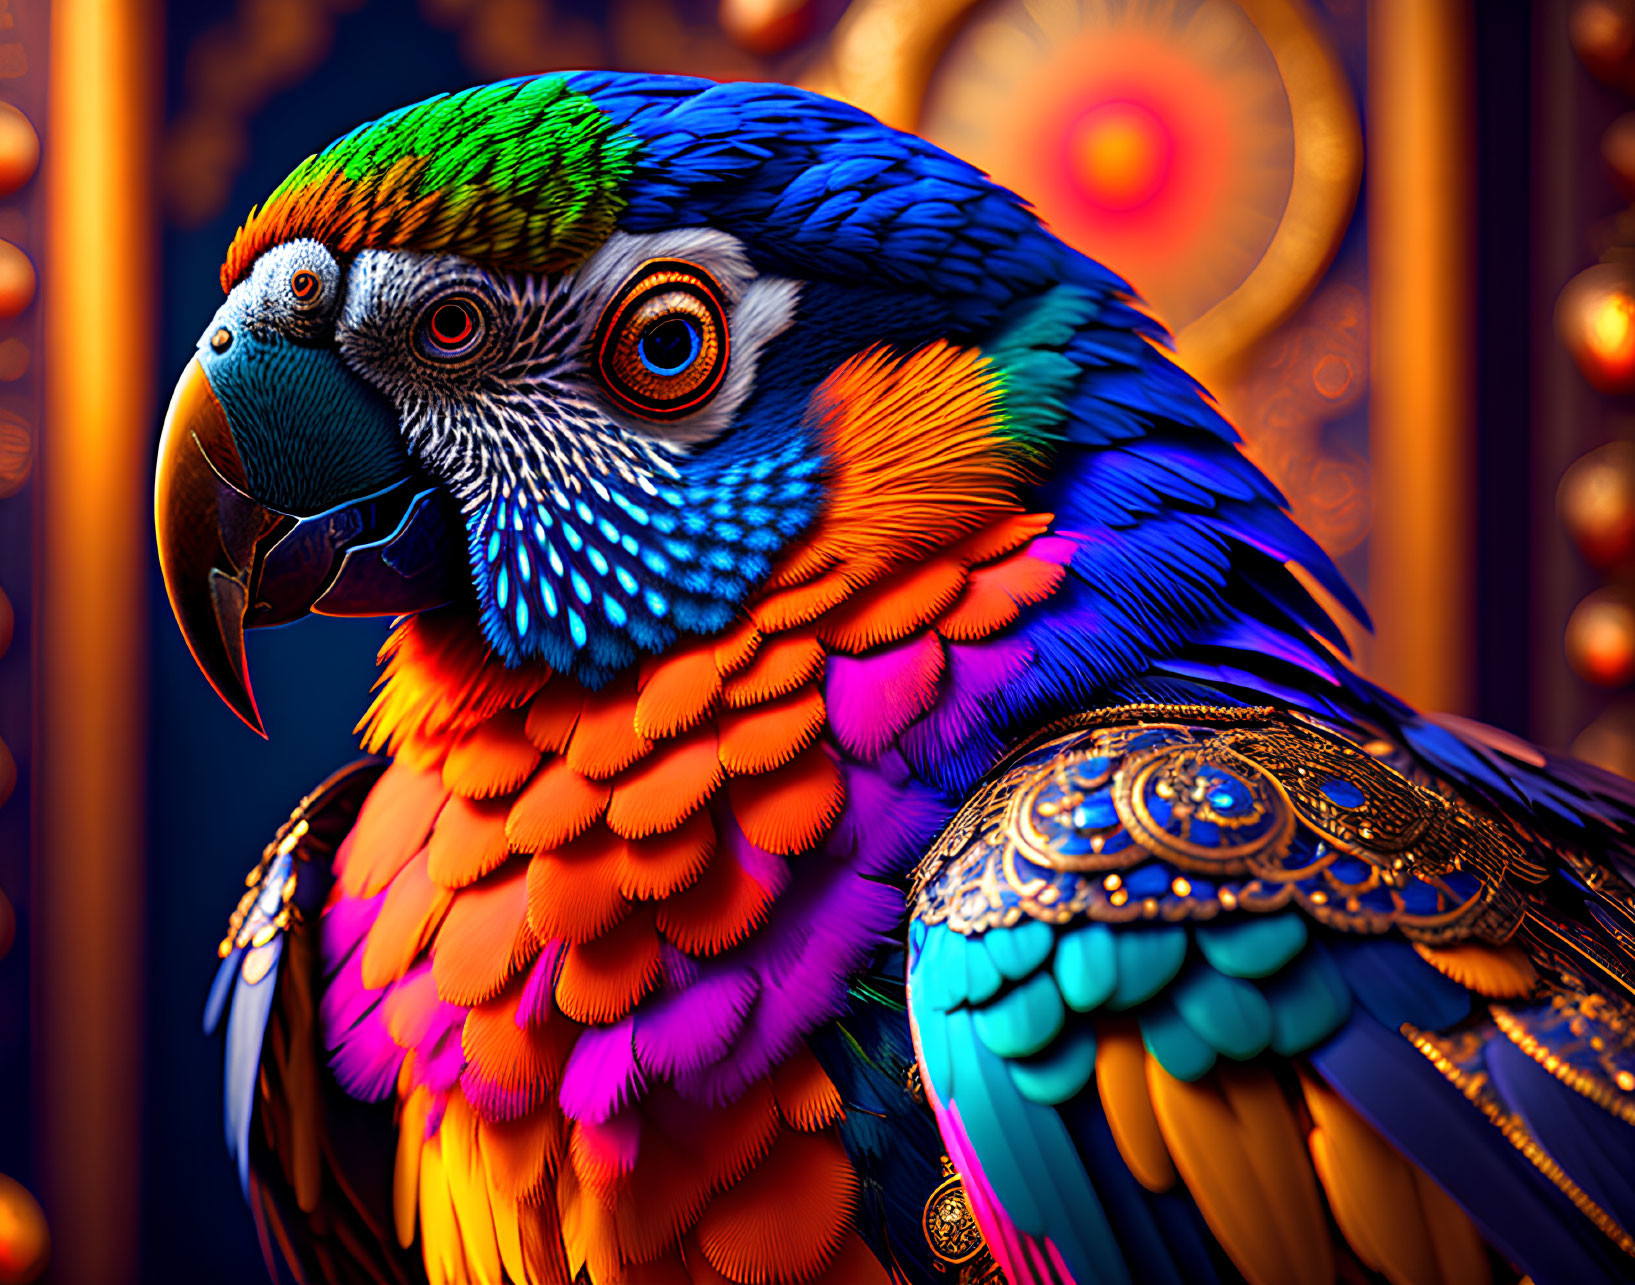 Colorful Parrot Digital Art with Mandala Background